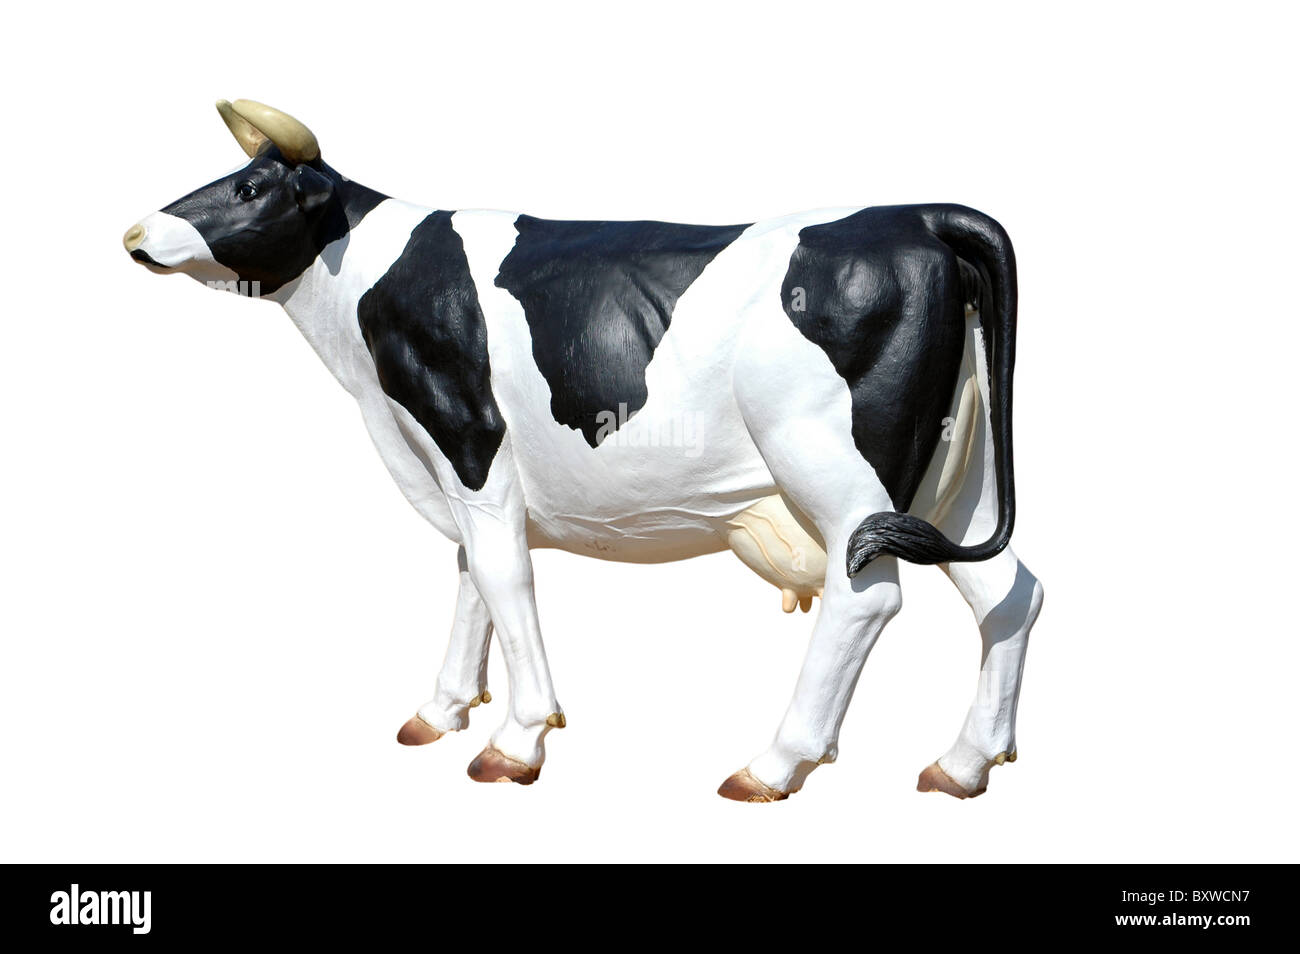 black and white plastic Cow figure isolated on white background Stock Photo